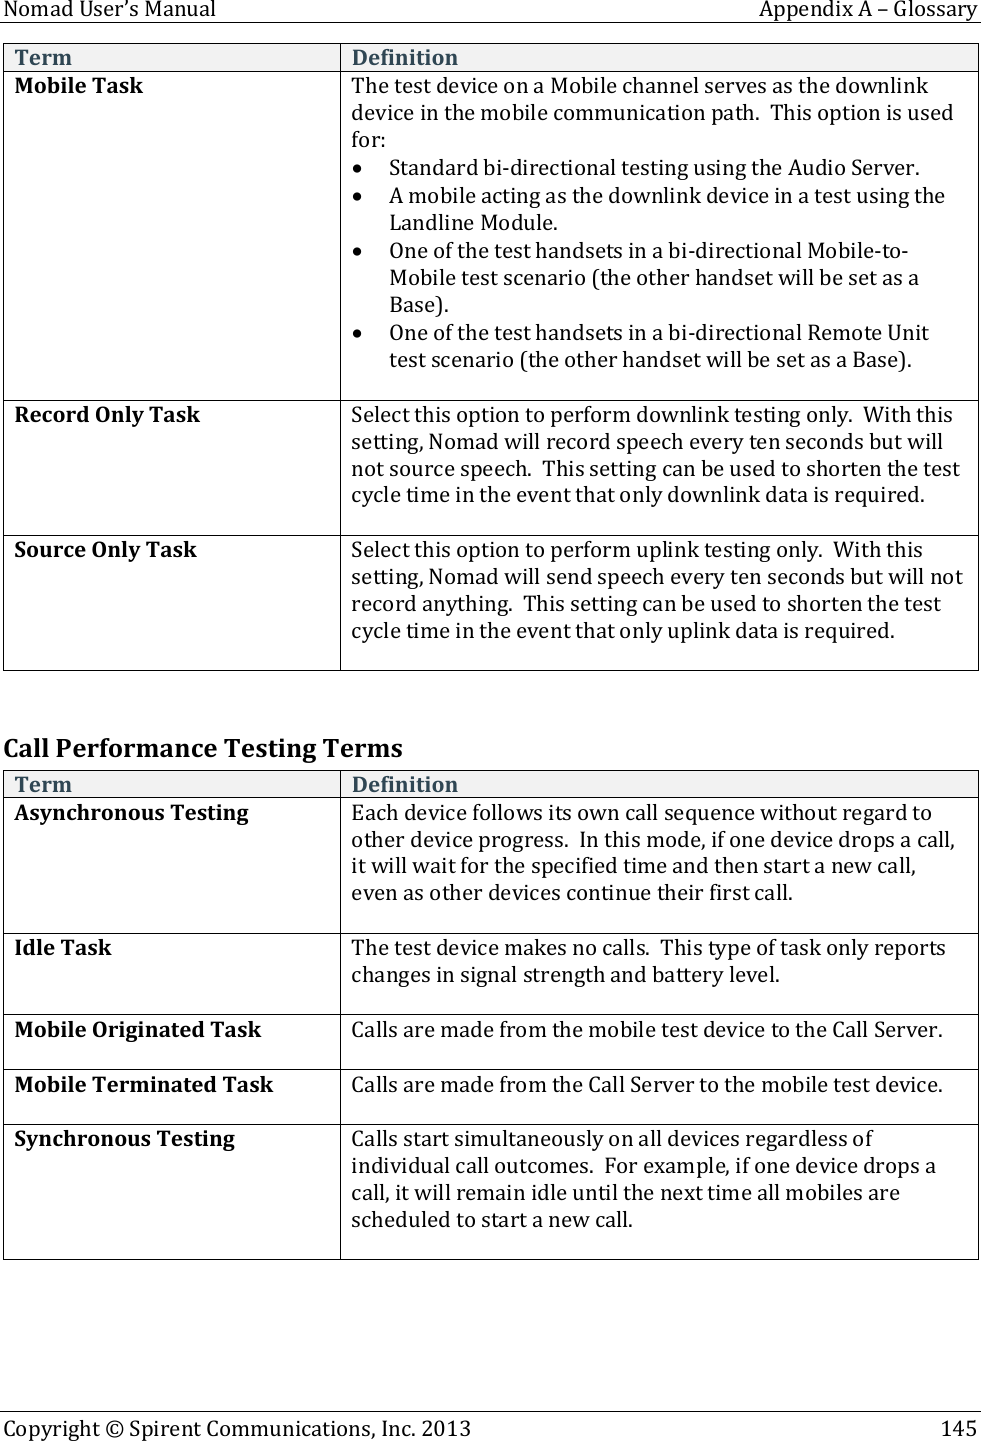  Nomad User’s Manual  Appendix A – Glossary Copyright © Spirent Communications, Inc. 2013    145  Term Definition Mobile Task The test device on a Mobile channel serves as the downlink device in the mobile communication path.  This option is used for:  Standard bi-directional testing using the Audio Server.  A mobile acting as the downlink device in a test using the Landline Module.  One of the test handsets in a bi-directional Mobile-to-Mobile test scenario (the other handset will be set as a Base).   One of the test handsets in a bi-directional Remote Unit test scenario (the other handset will be set as a Base).  Record Only Task Select this option to perform downlink testing only.  With this setting, Nomad will record speech every ten seconds but will not source speech.  This setting can be used to shorten the test cycle time in the event that only downlink data is required.  Source Only Task Select this option to perform uplink testing only.  With this setting, Nomad will send speech every ten seconds but will not record anything.  This setting can be used to shorten the test cycle time in the event that only uplink data is required.   Call Performance Testing Terms Term Definition Asynchronous Testing Each device follows its own call sequence without regard to other device progress.  In this mode, if one device drops a call, it will wait for the specified time and then start a new call, even as other devices continue their first call.  Idle Task The test device makes no calls.  This type of task only reports changes in signal strength and battery level.  Mobile Originated Task  Calls are made from the mobile test device to the Call Server.  Mobile Terminated Task Calls are made from the Call Server to the mobile test device.  Synchronous Testing Calls start simultaneously on all devices regardless of individual call outcomes.  For example, if one device drops a call, it will remain idle until the next time all mobiles are scheduled to start a new call.  